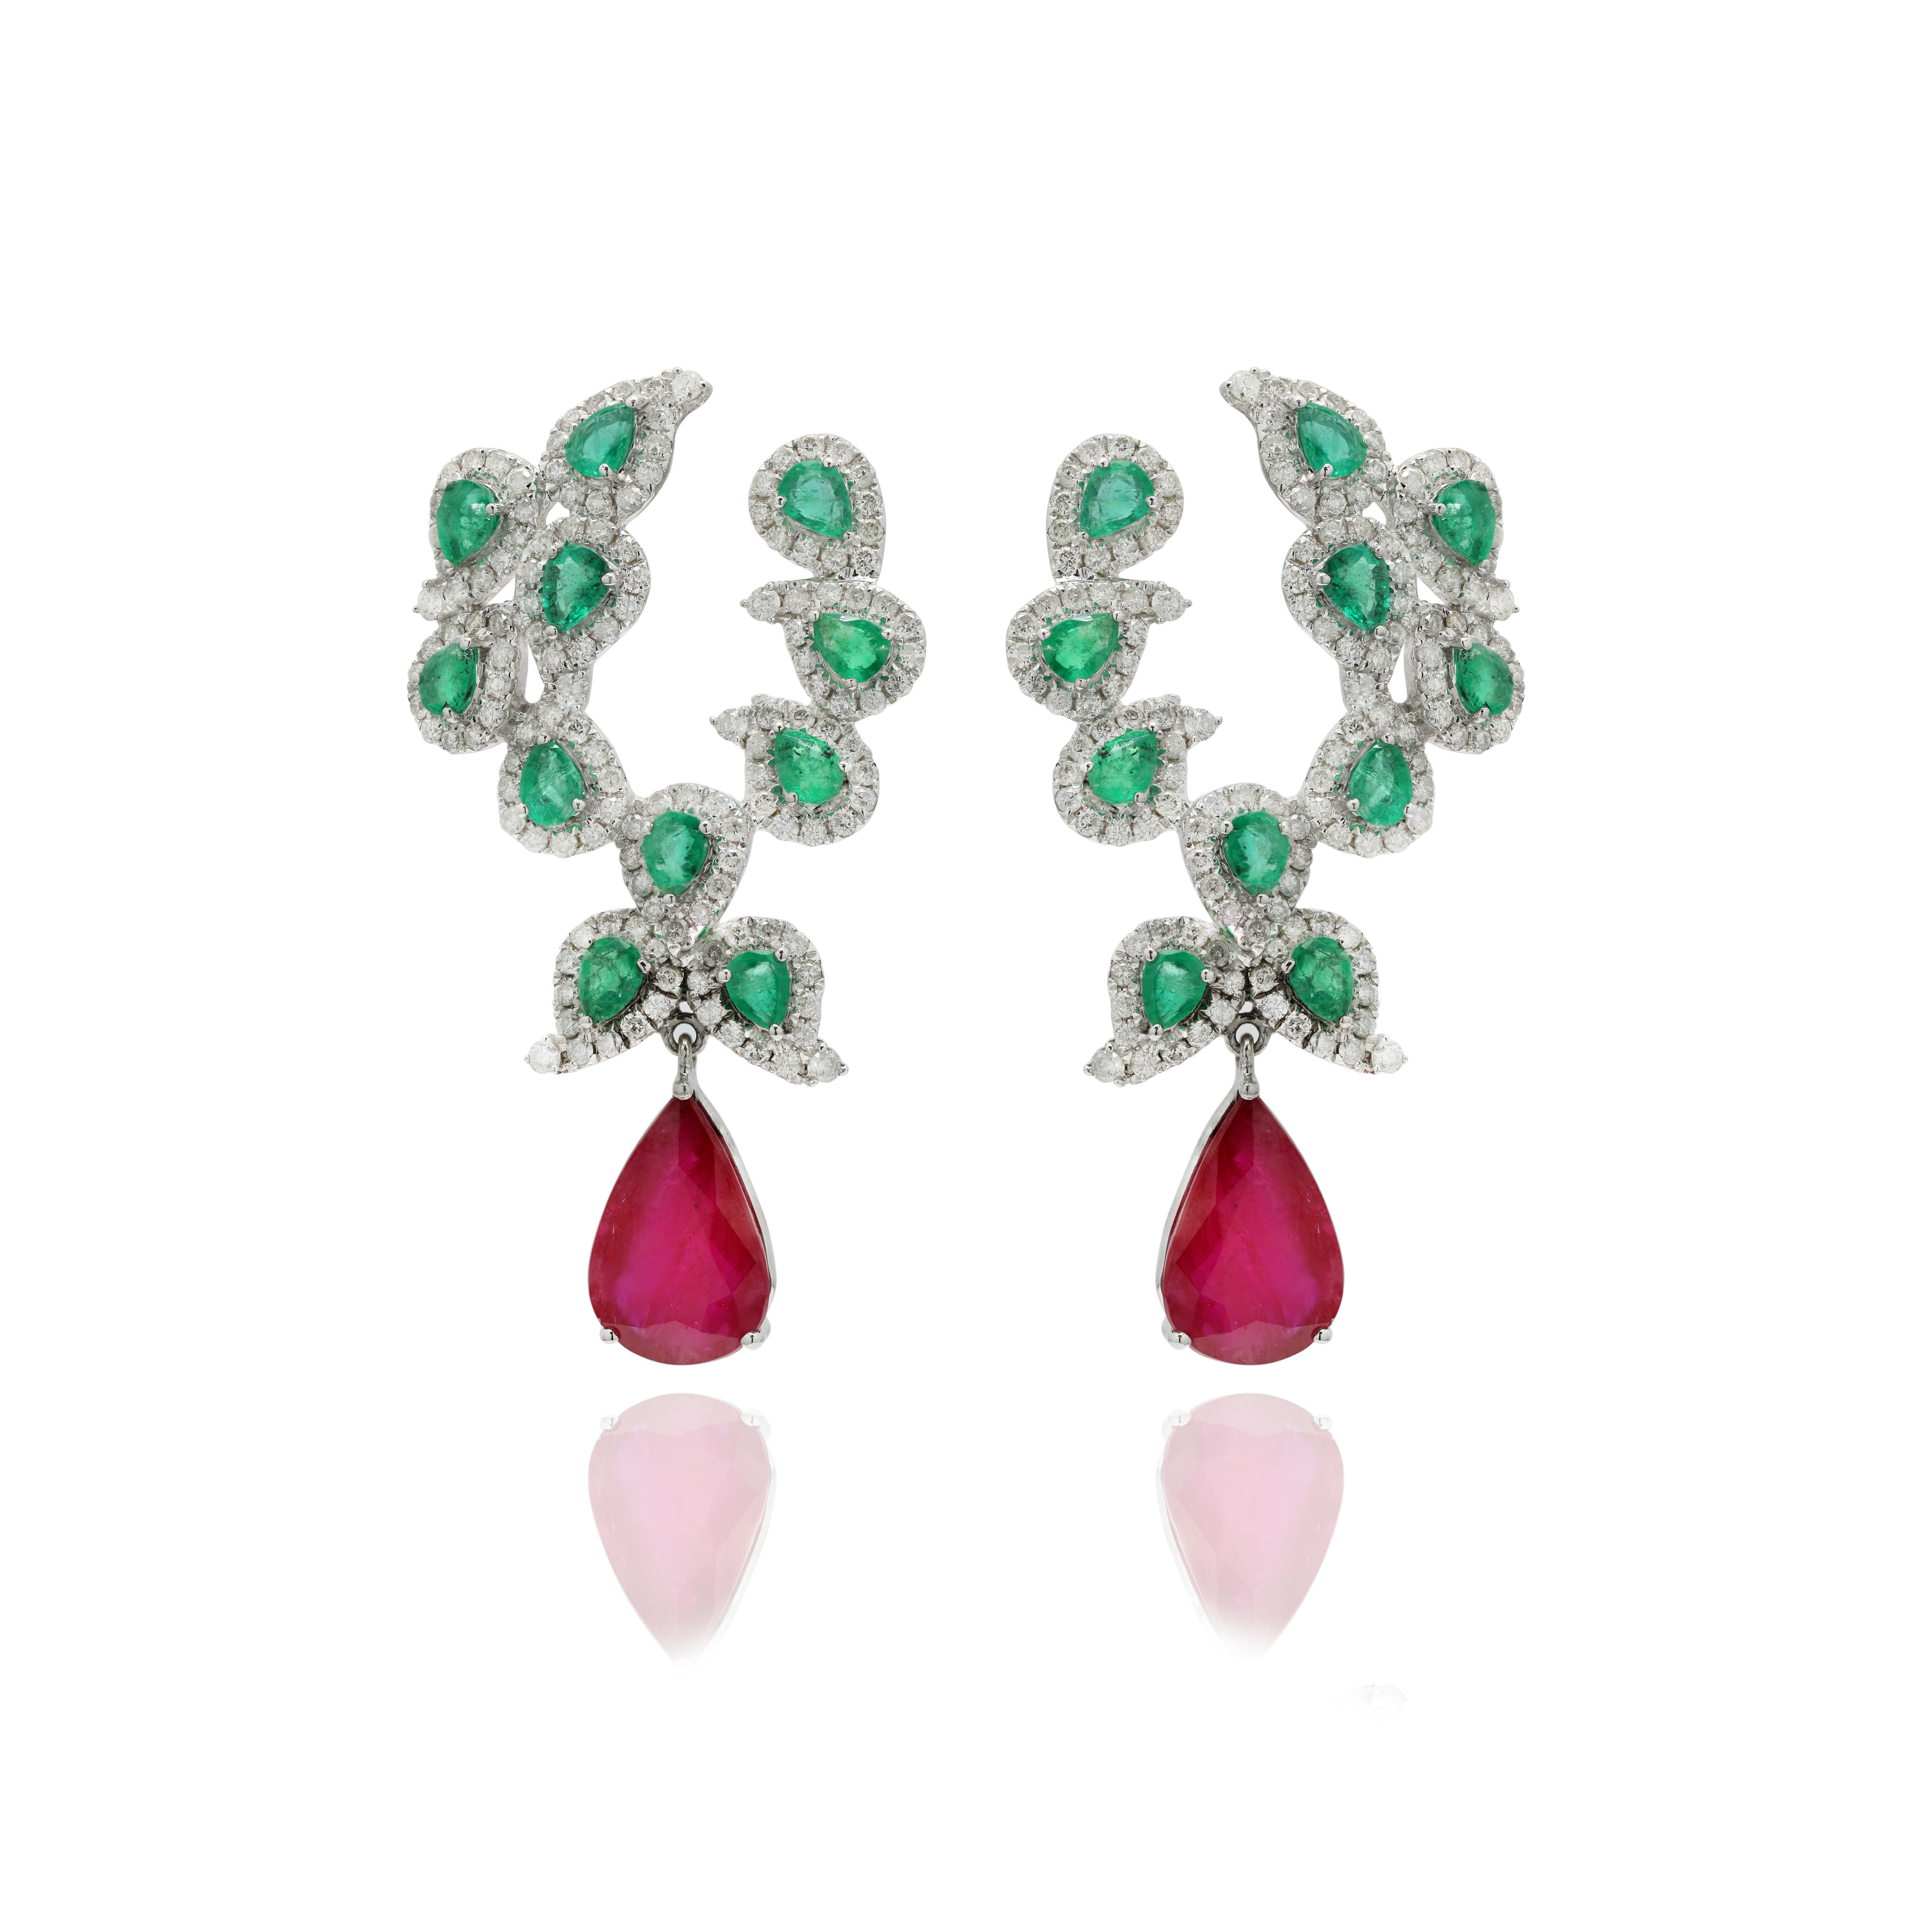 Emerald, Ruby and Diamond Dangle earrings to make a statement with your look. These earrings create a sparkling, luxurious look featuring pear cut gemstone. These are a great bridesmaid gift, wedding gift or christmas gift for anyone on your